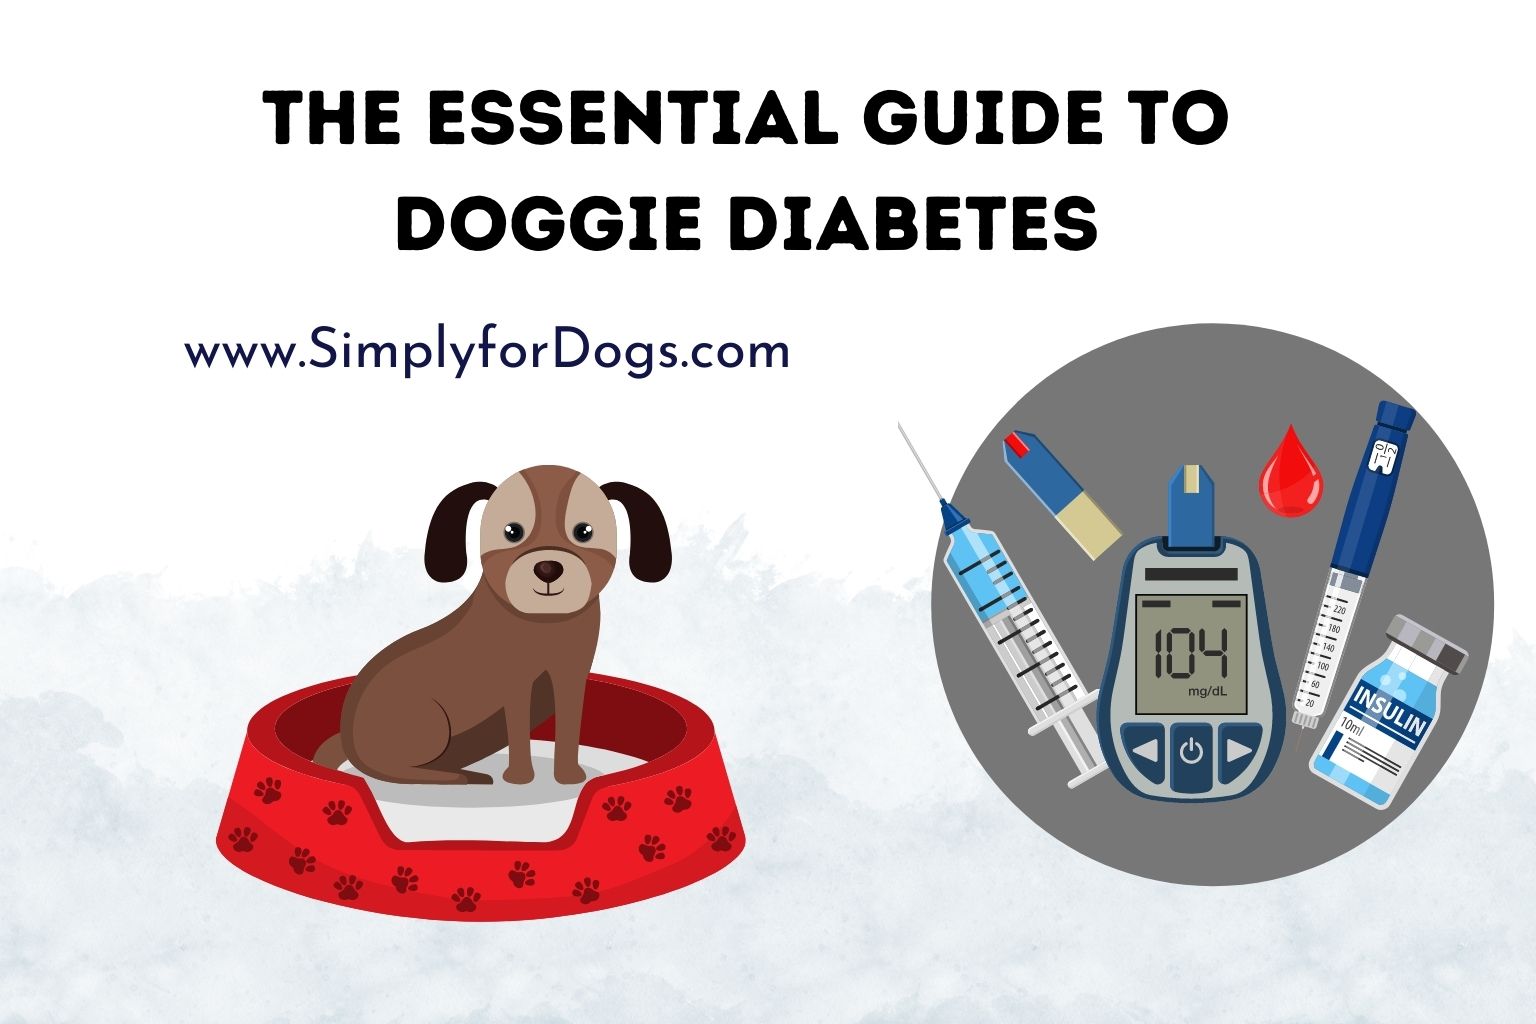 The Essential Guide to Doggie Diabetes